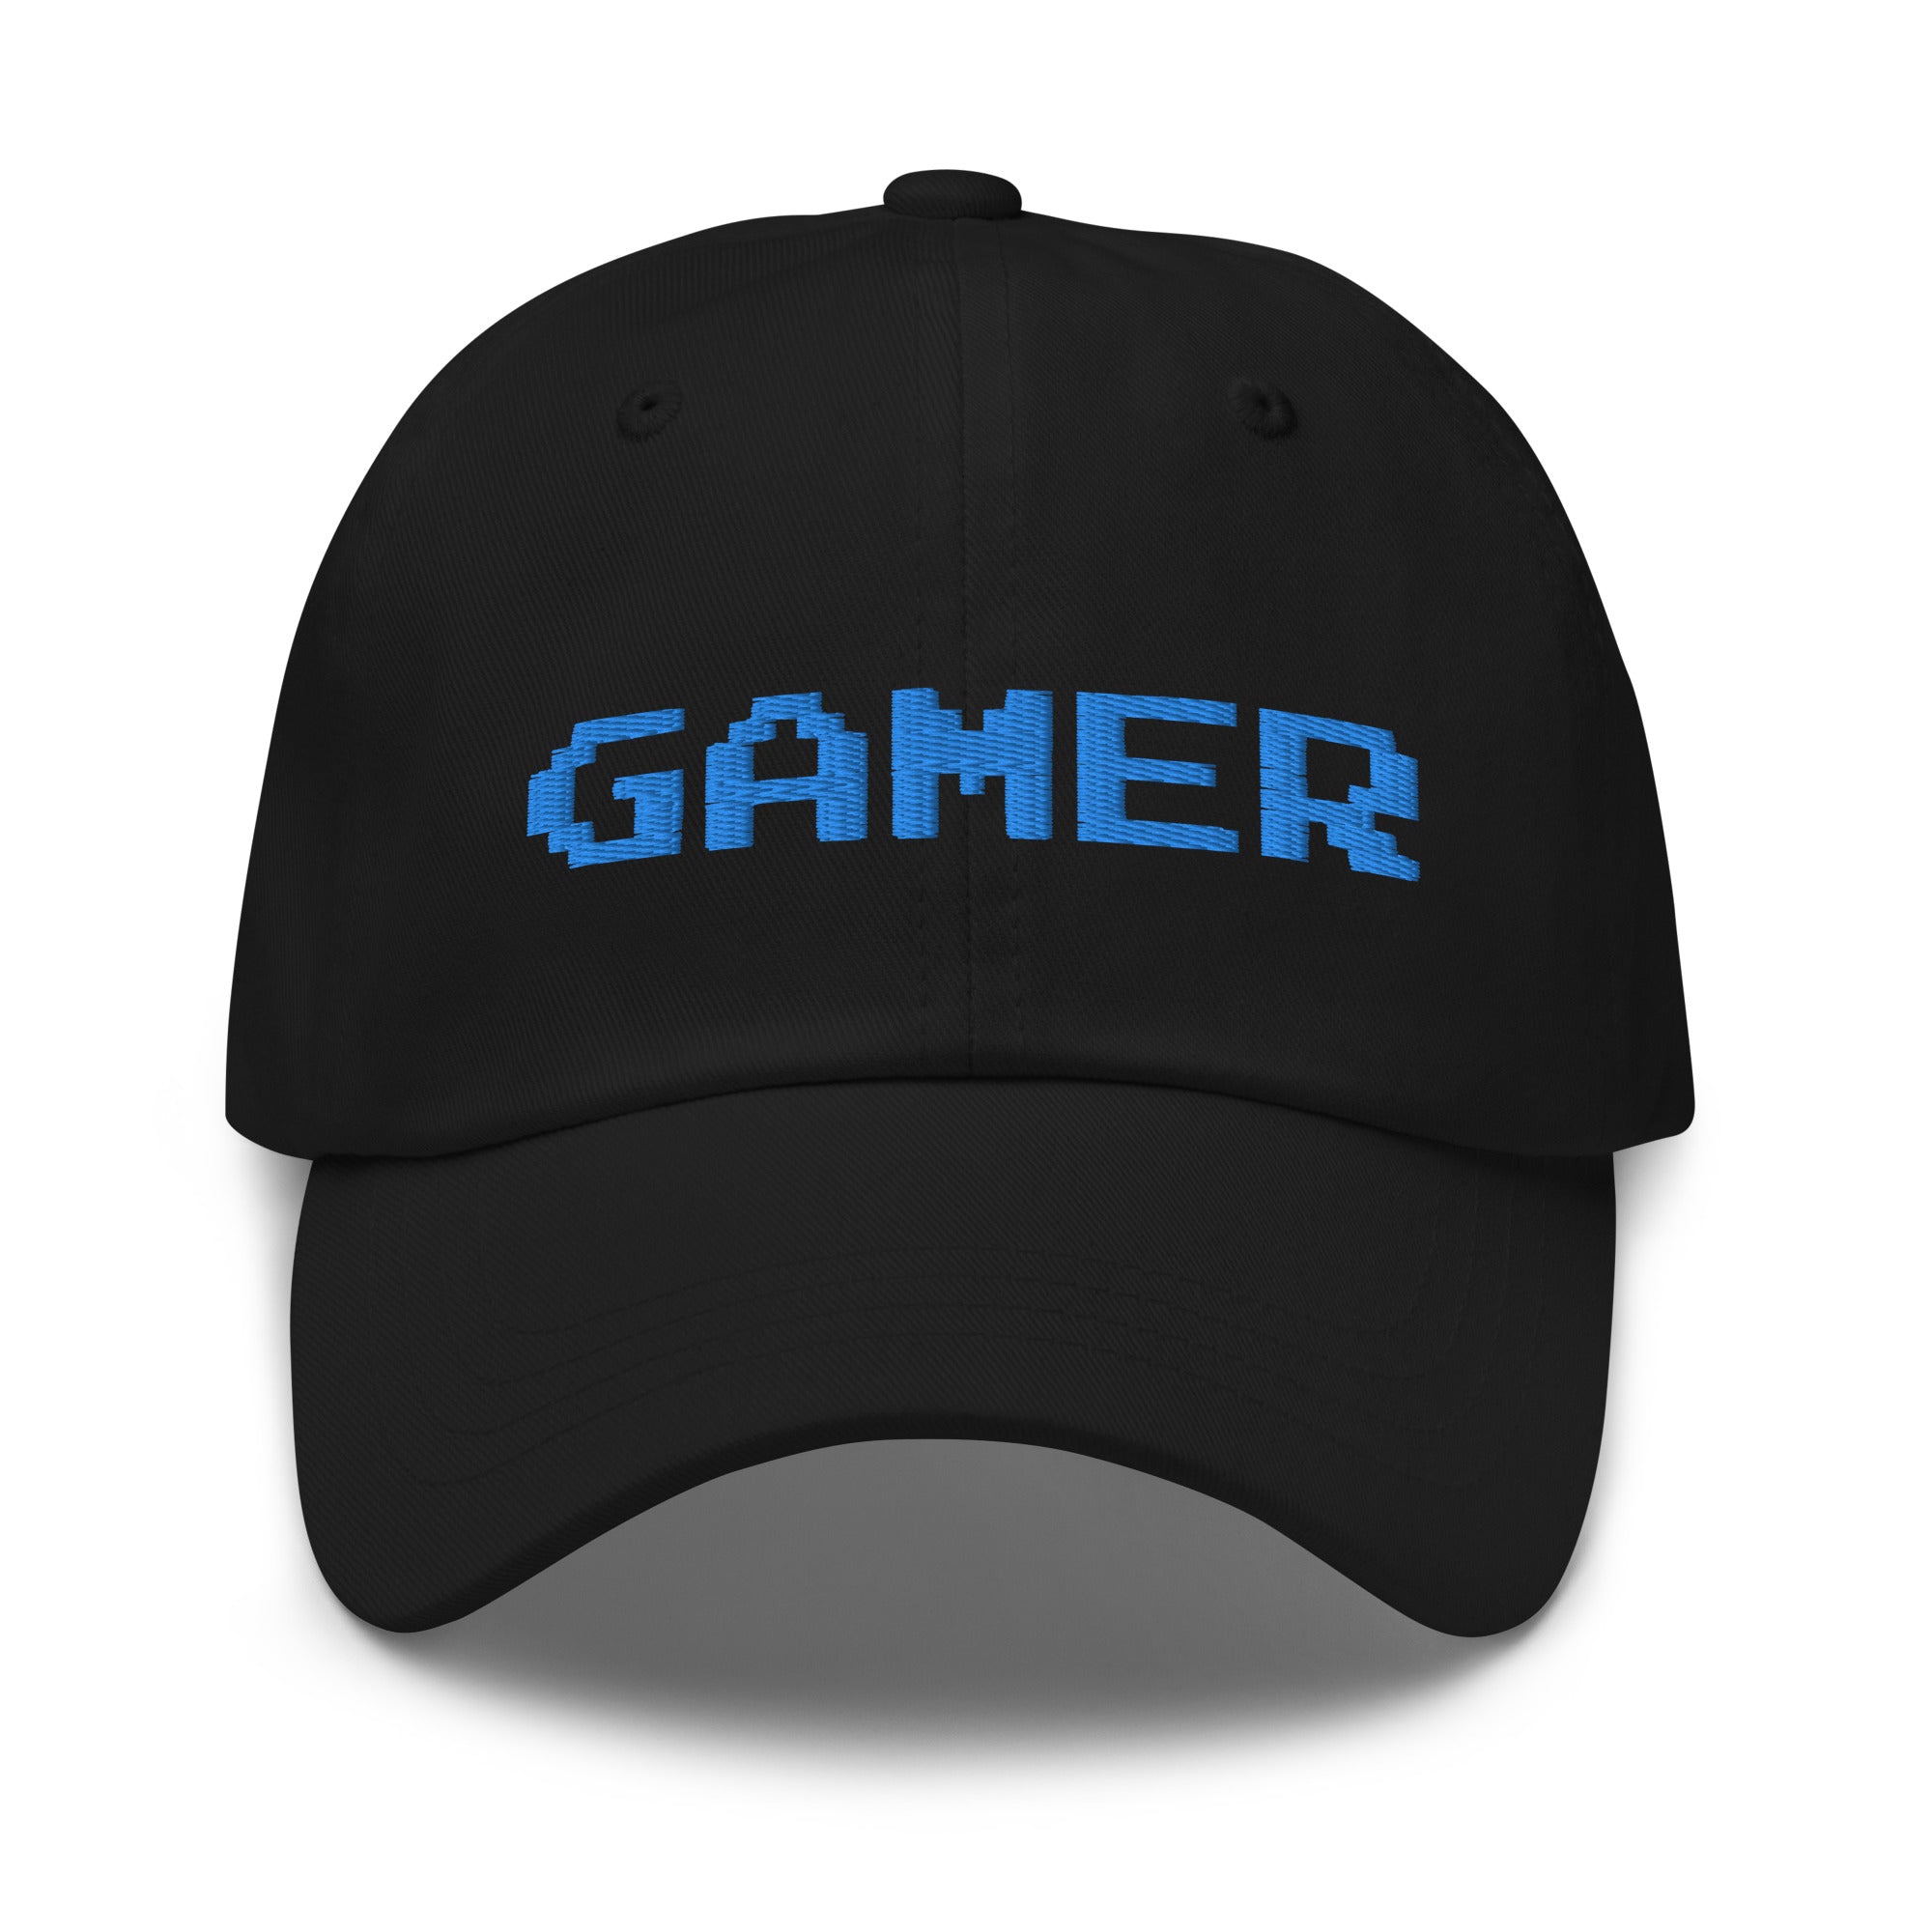 8 Bit Gamer Embroidered Baseball Cap 80's Retro Style Gaming Blue Thread Dad hat - Edge of Life Designs